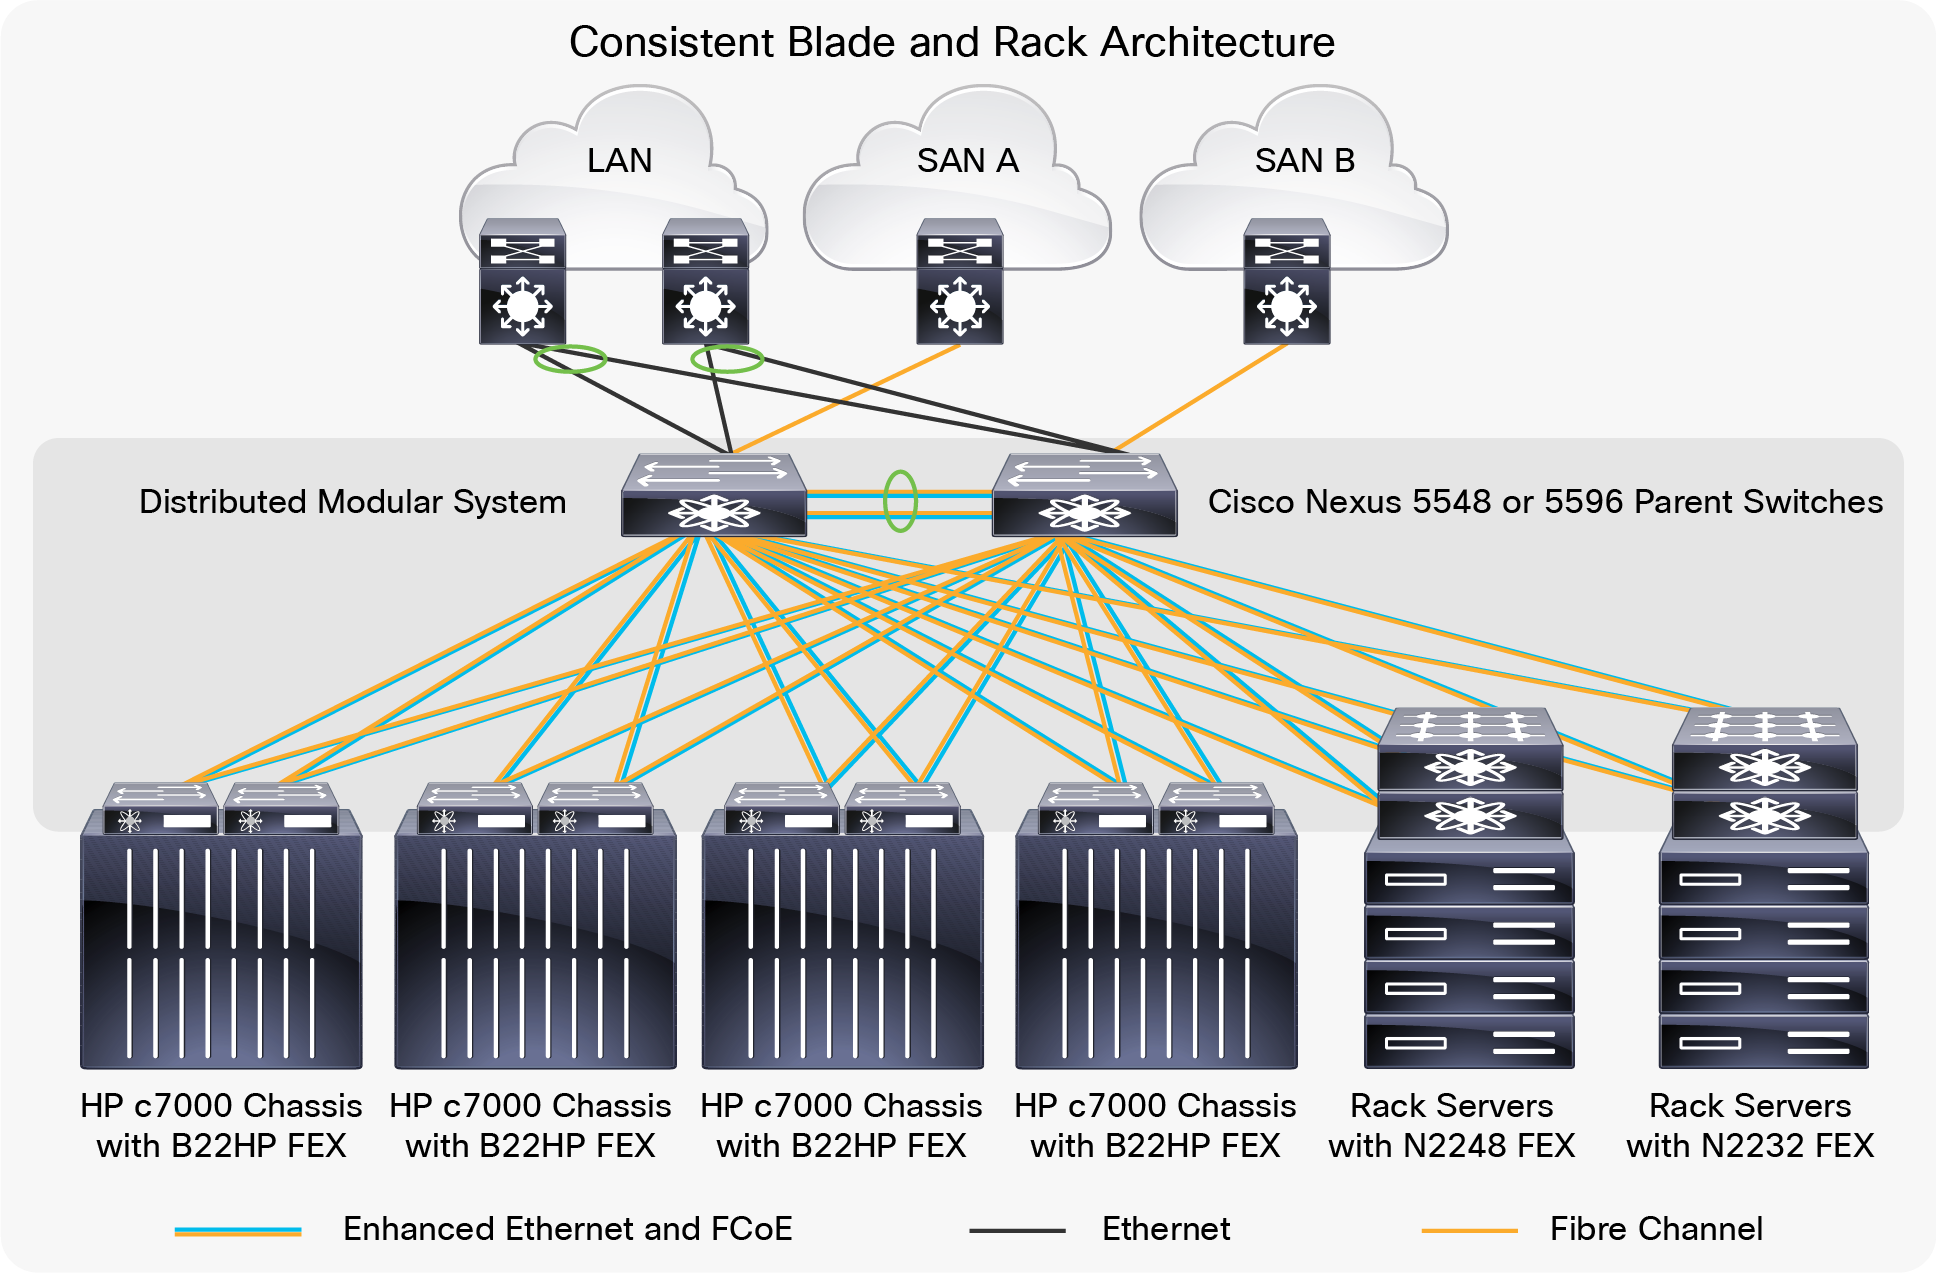 Cisco Nexus Fabric extenders provide highly scalable unified server access connectivity